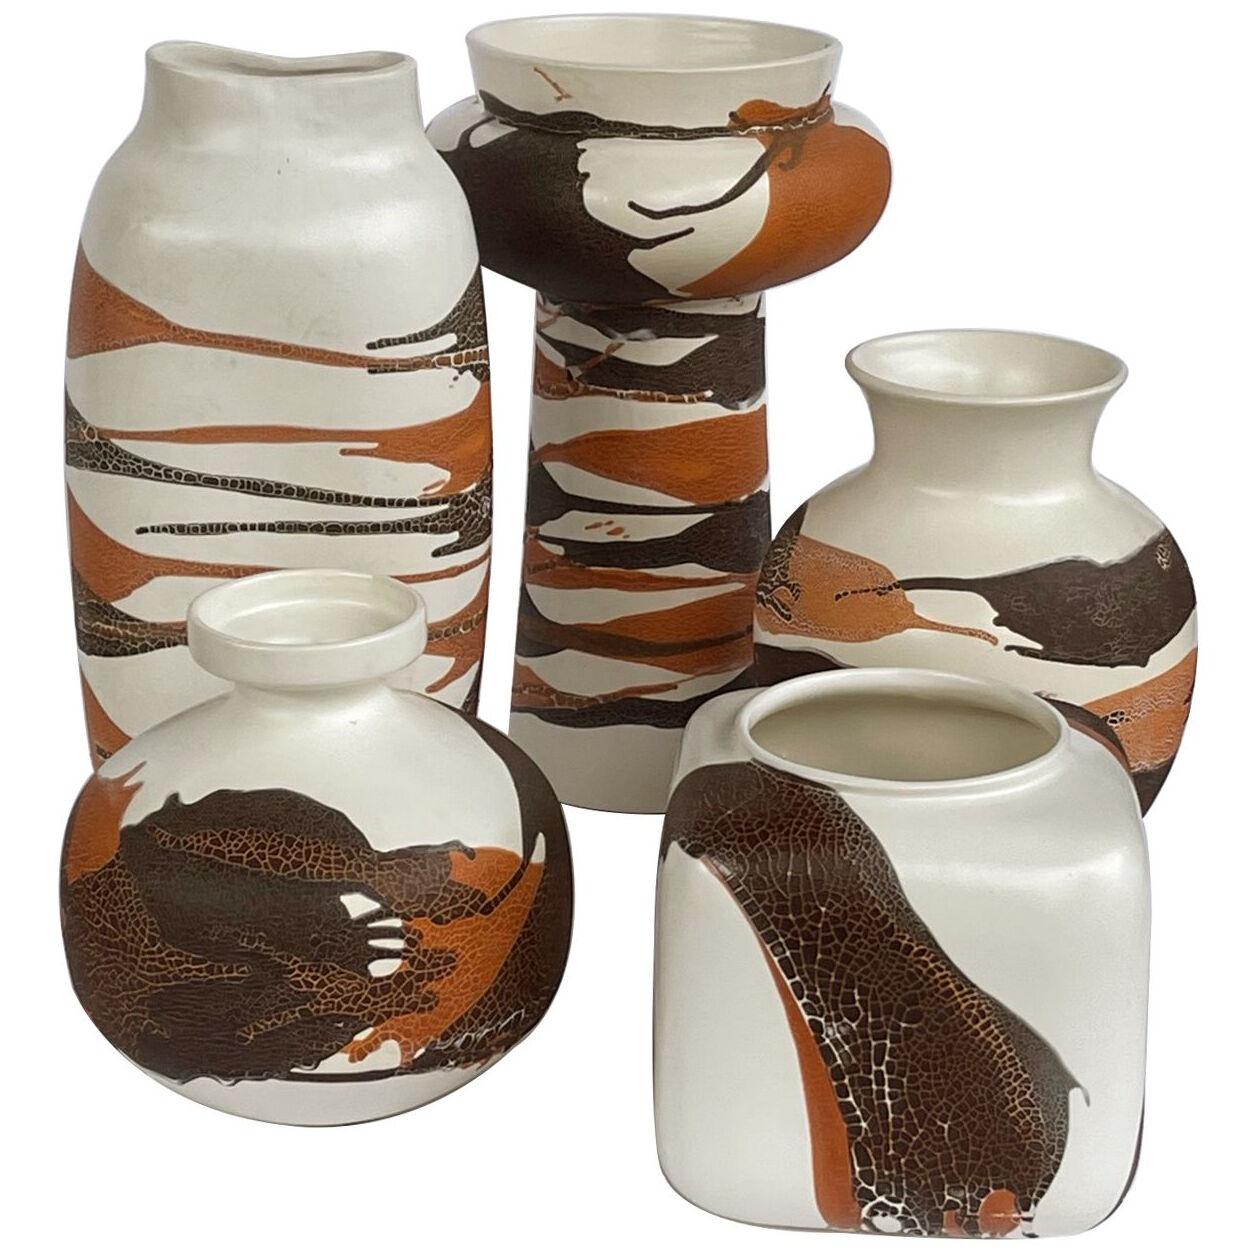 Set of 5 Royal Haeger pottery vases w brown & russet drip glaze on ivory ground